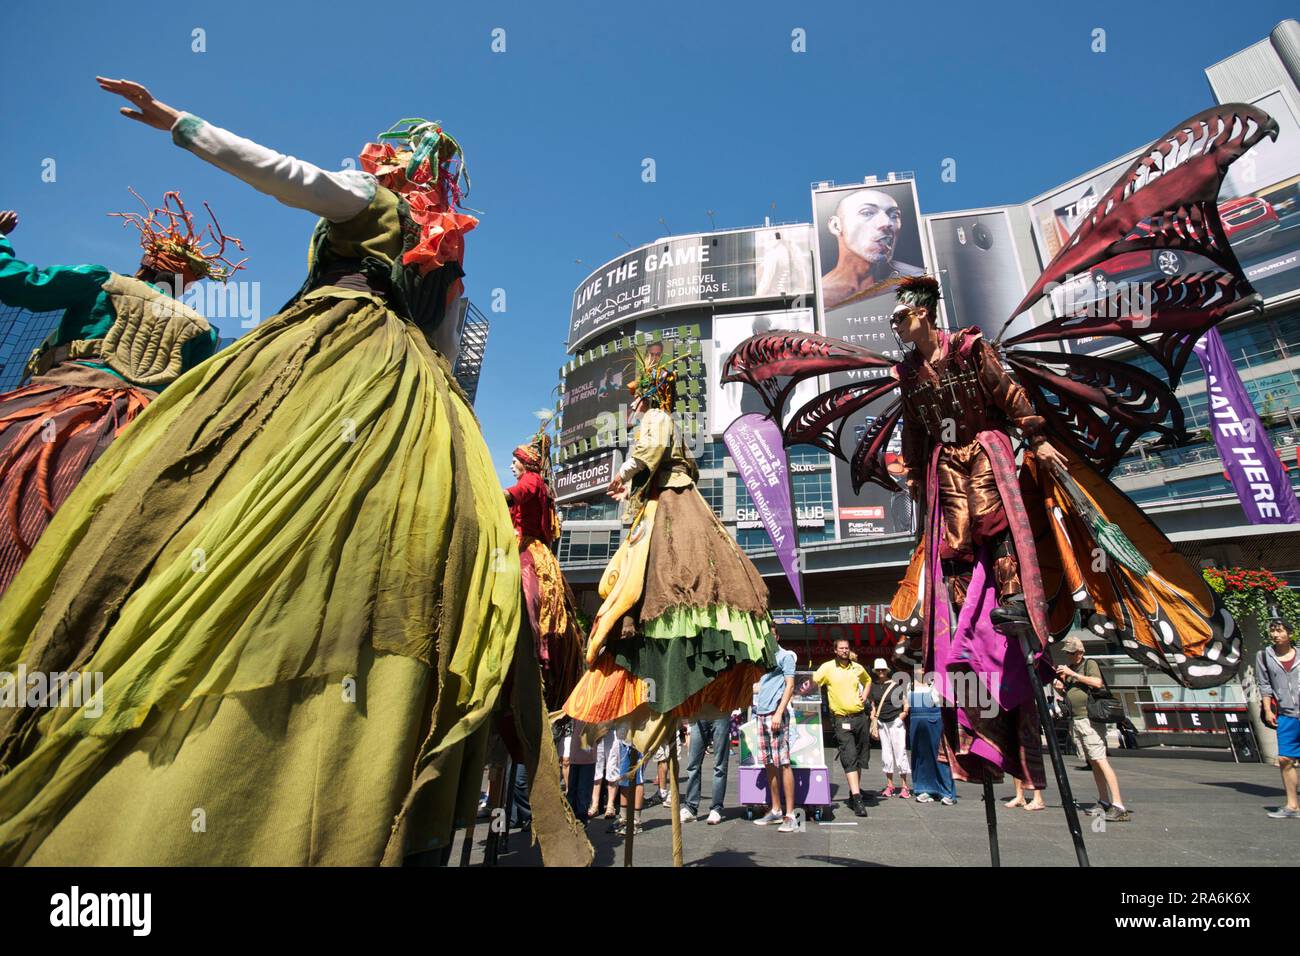 Toronto, Ontario / Canada - Aug 24, 2014: Performers on stilts in a street festival Stock Photo